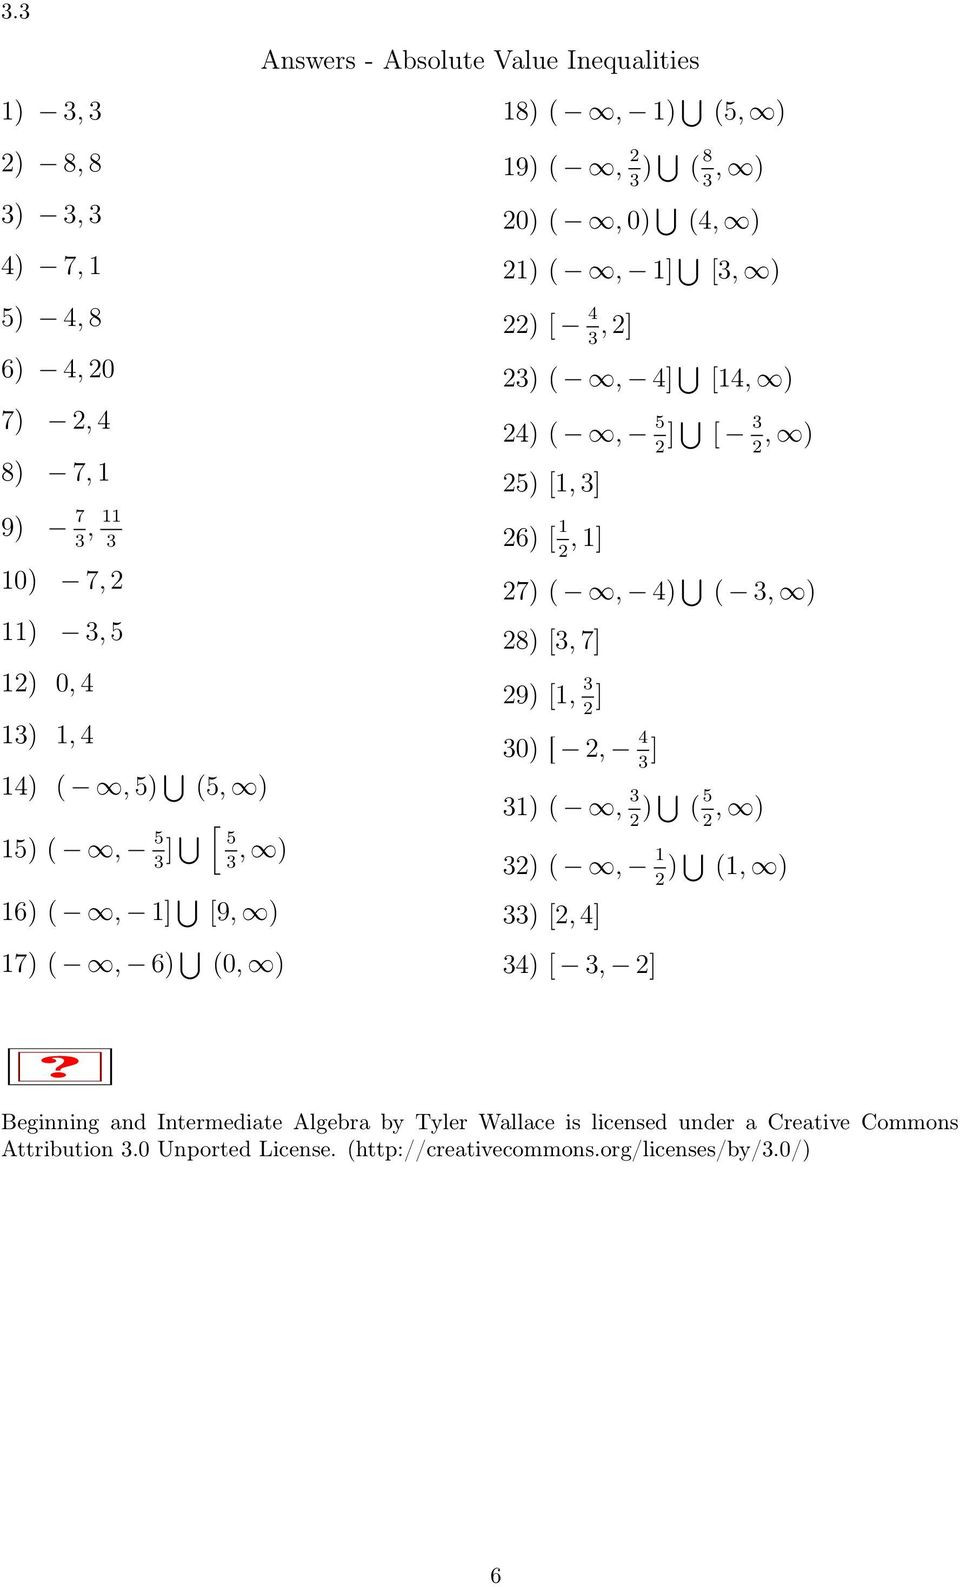 Interval Notation Worksheet with Answers Inequalities Absolute Value Inequalities Pdf Free Download